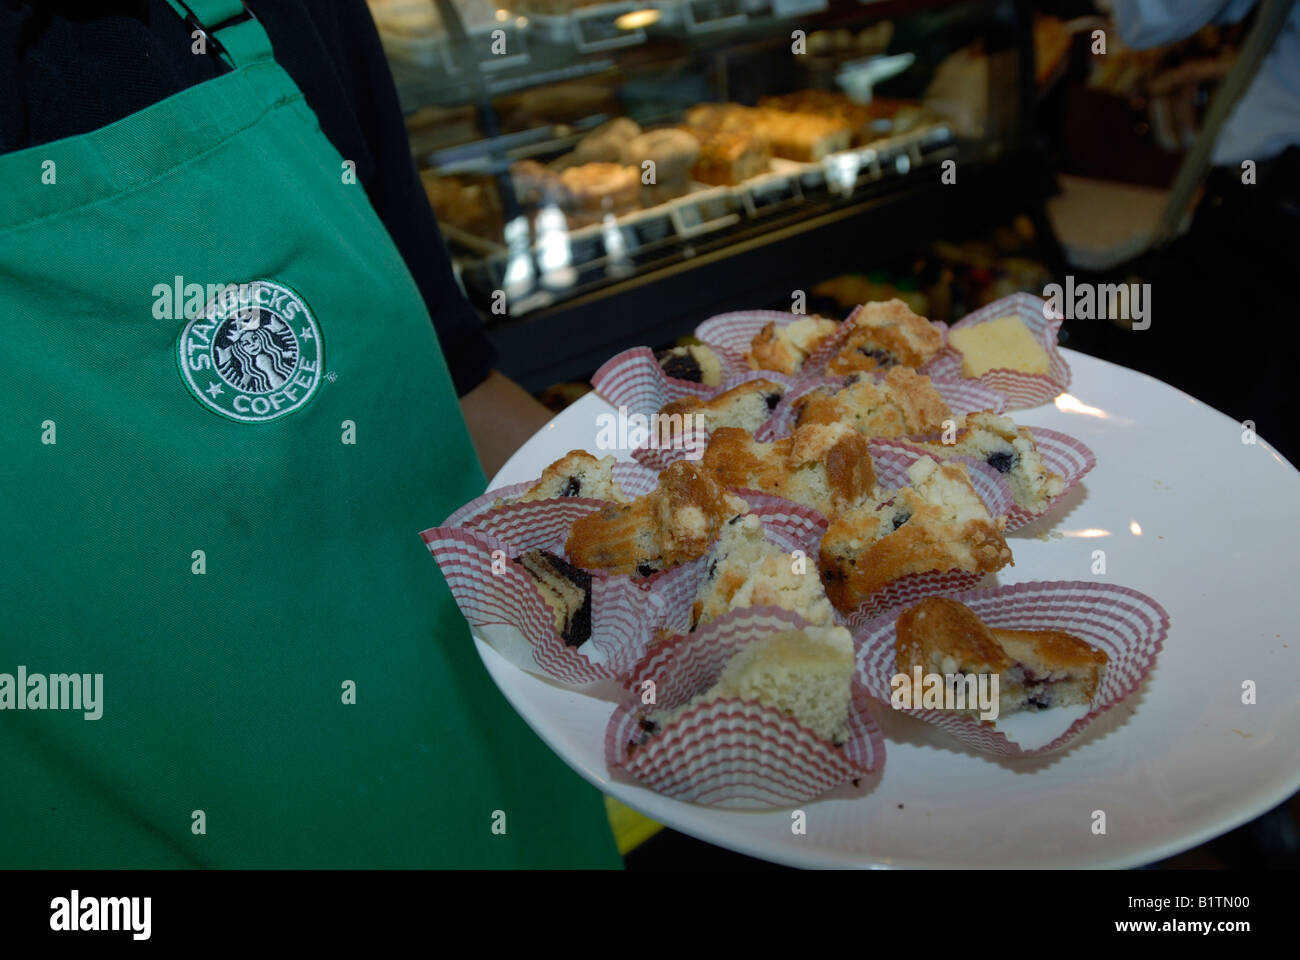 Starbucks employees pass out samples at the opening of a new coffeehouse in Harlem in New York Stock Photo